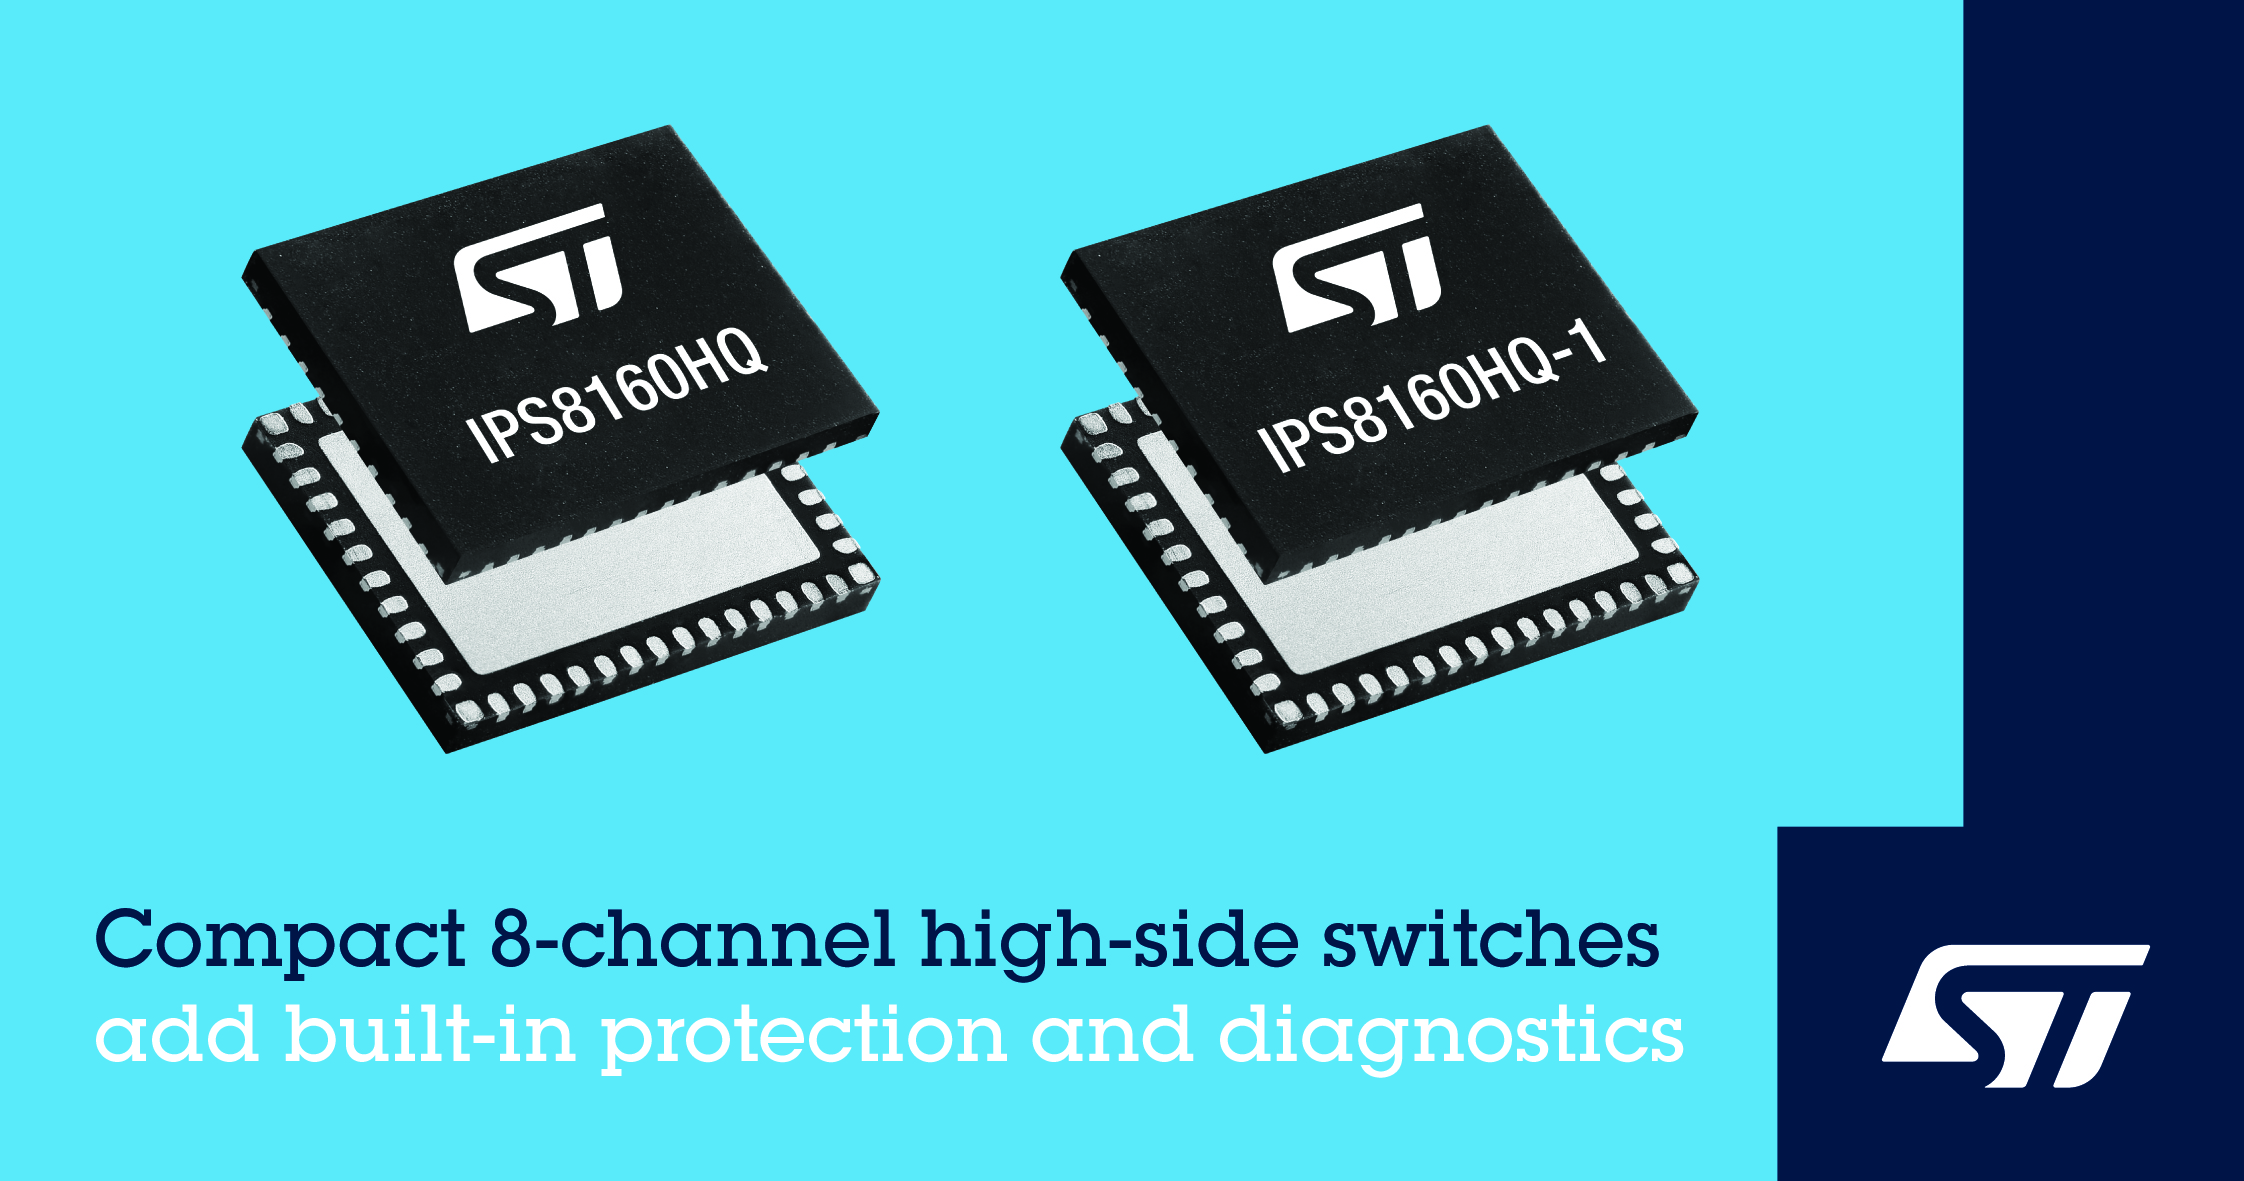 Octal High-Side Switches Feature Protection and Diagnostics in Space-Saving Footprint